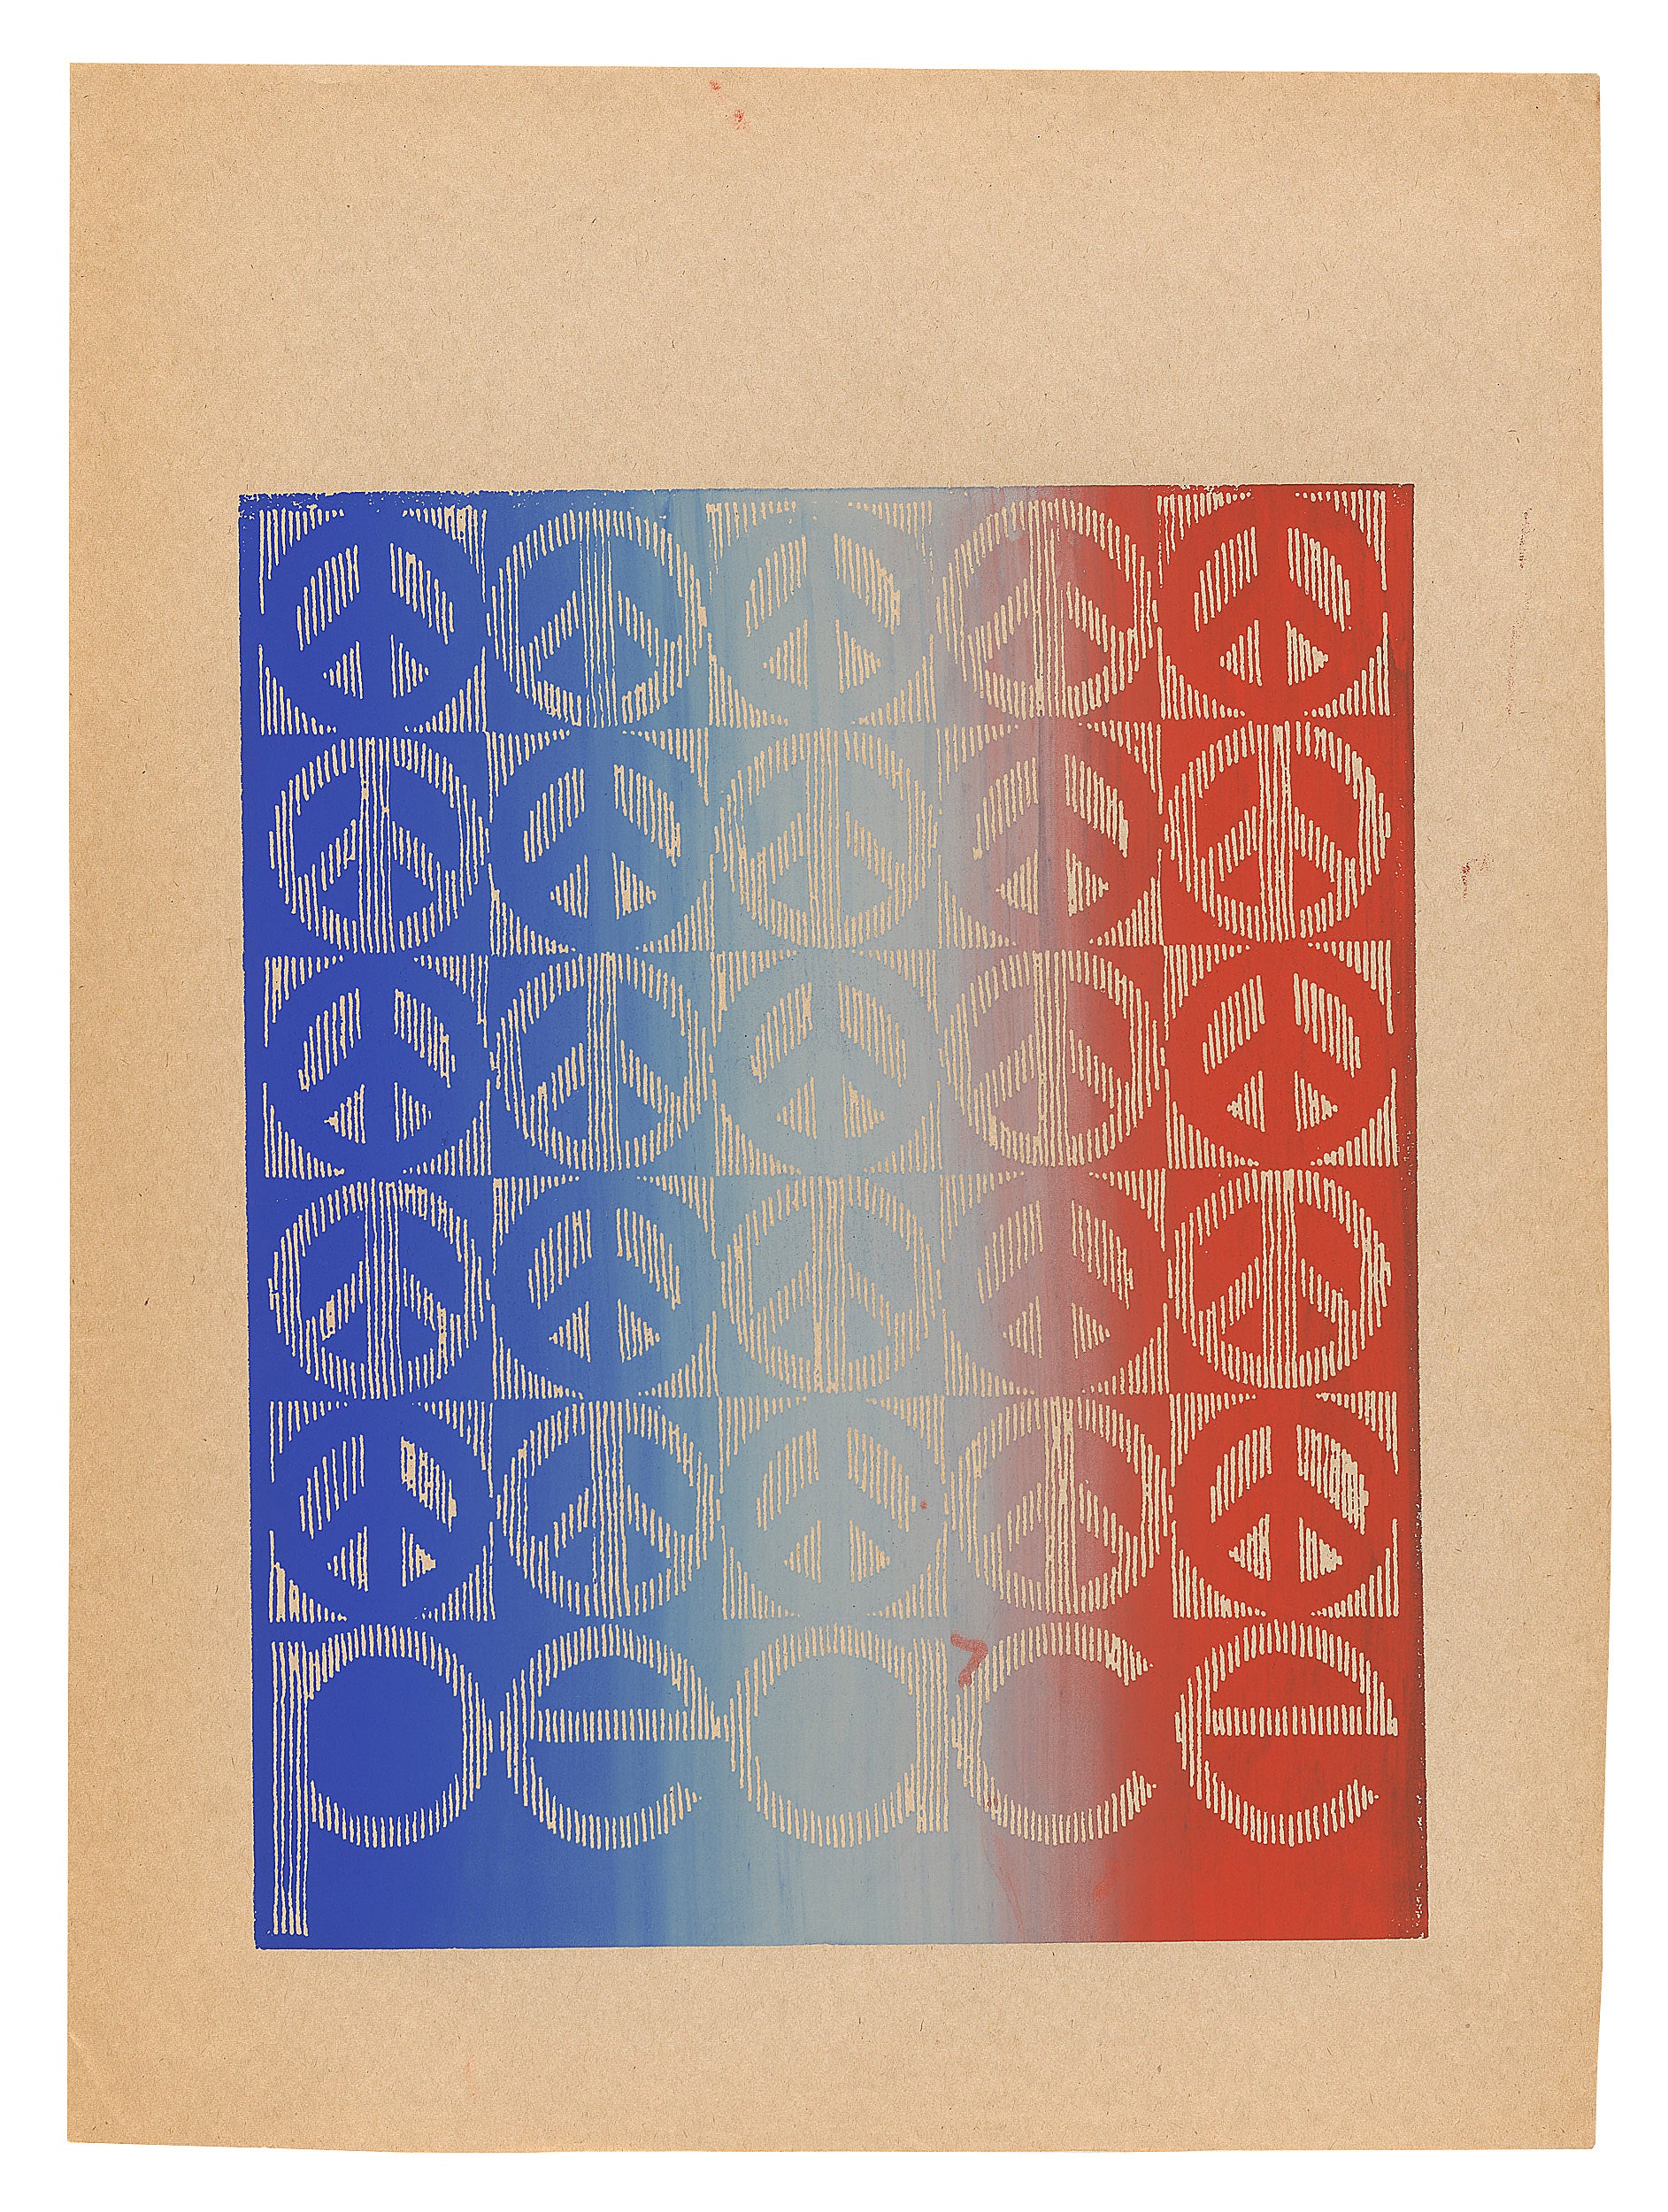 Colorful poster patterned with peace signs.